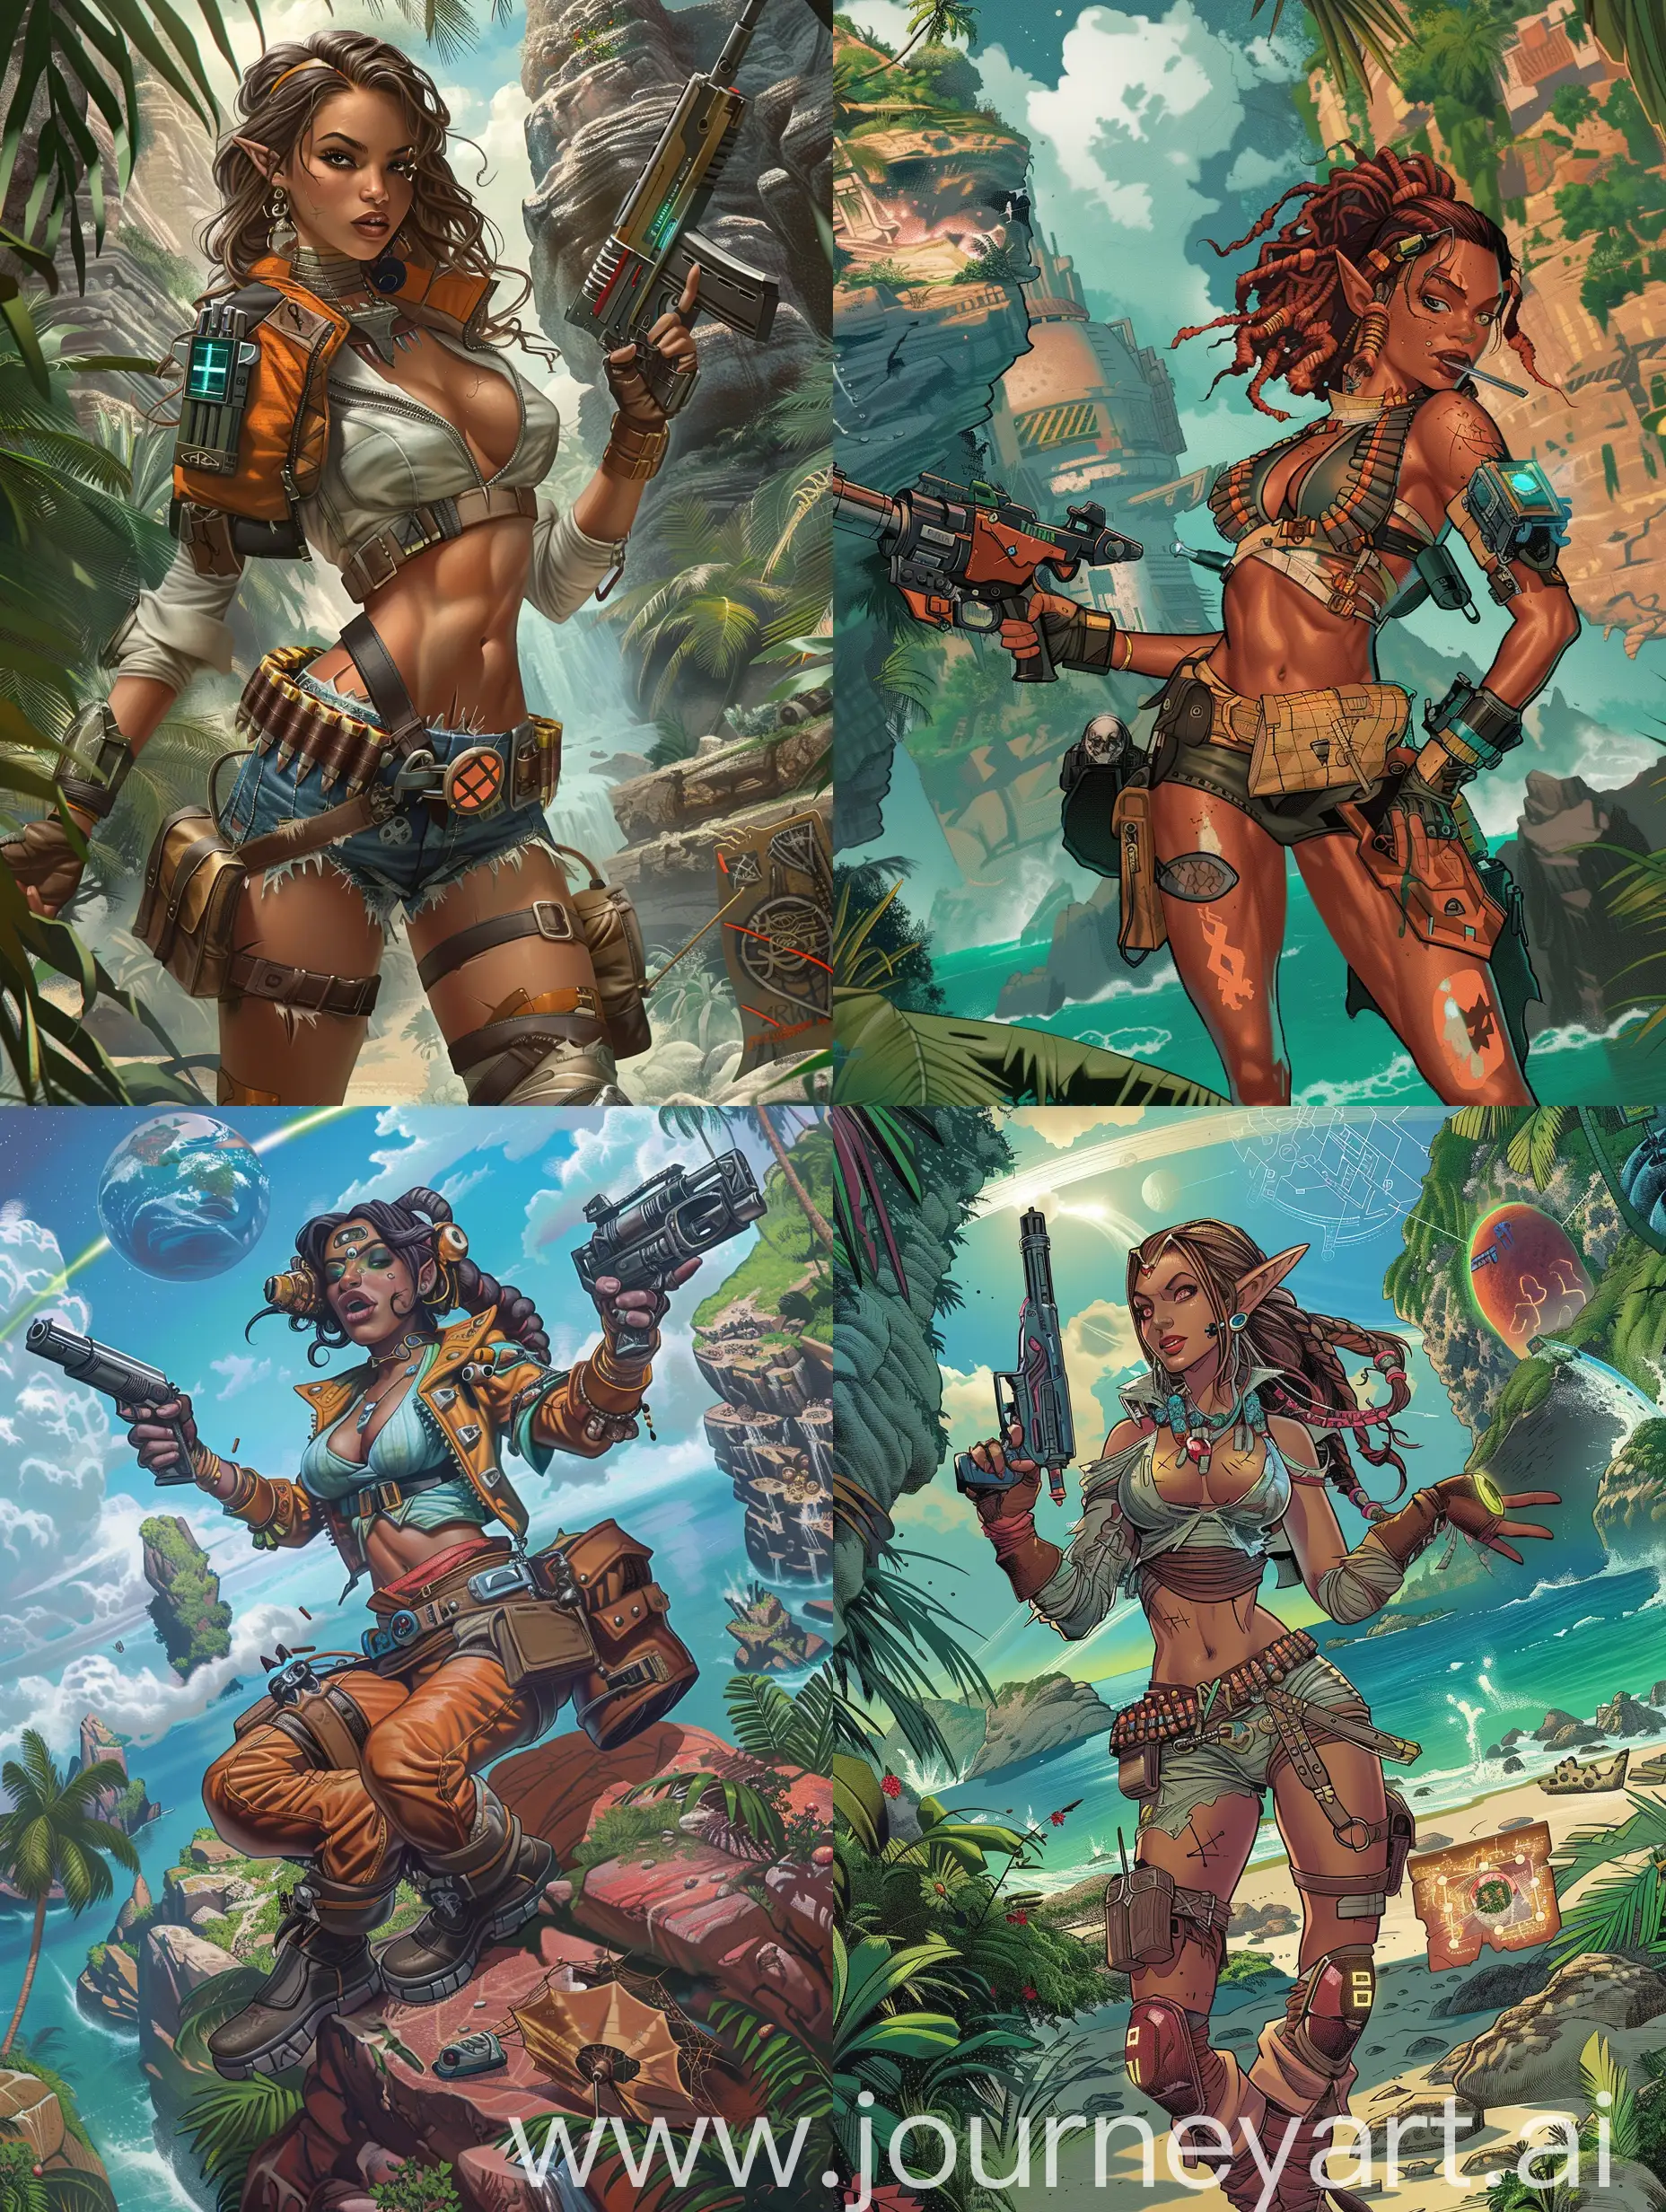 Photo Illustration featuring a character from the Dungeons & Dragons role-playing game. A marvellous tropical island in alien planet backdrop. The character is a beautiful female space pirate in exquisite clothing with a blaster and a cybermap of treasures, Jim Lee and Luis Royo style, features, ancient, highly detailed, action poses, awesome face, complex, X-Men comic book cover